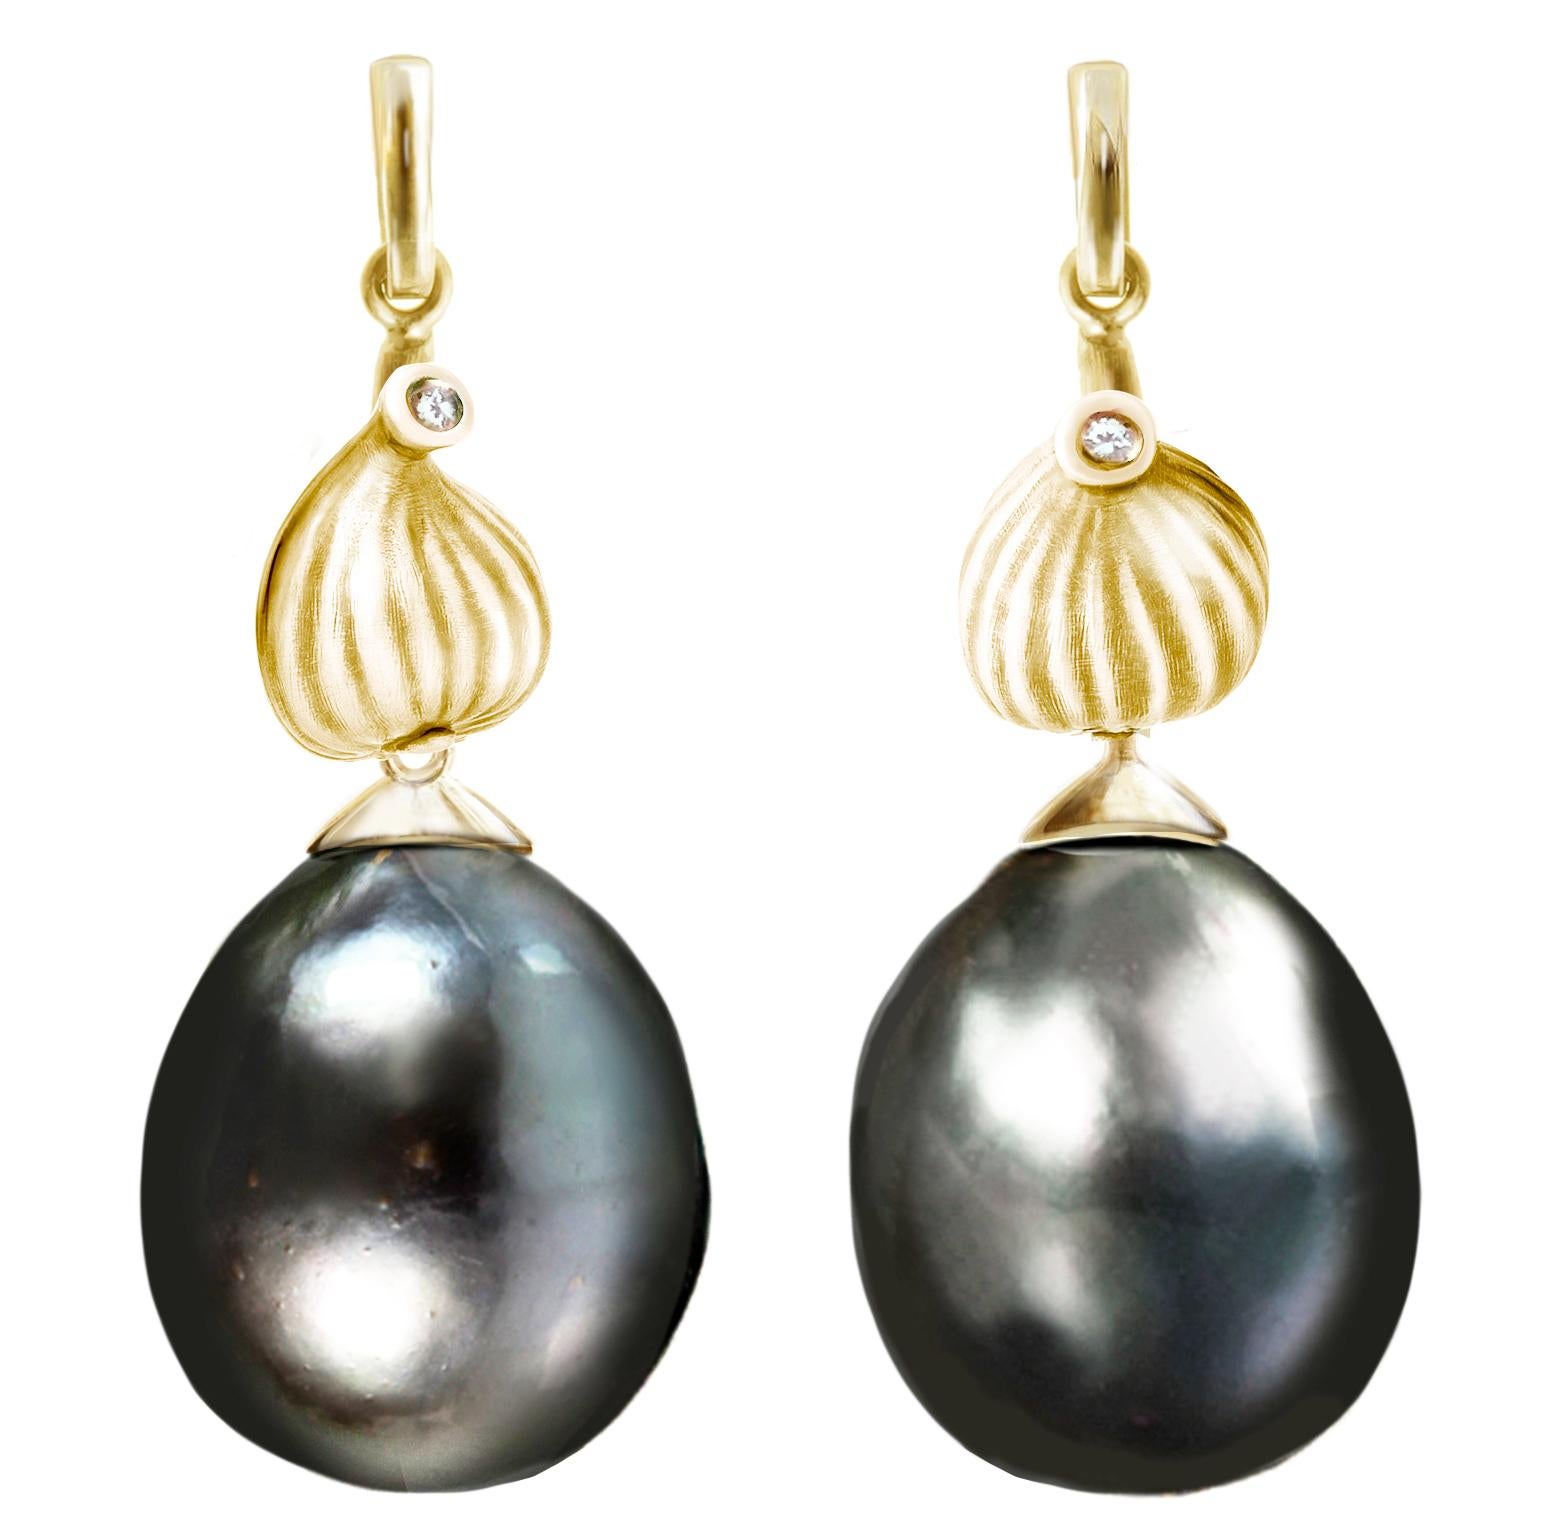 Round Cut Black Pearls Yellow Gold Fig Cocktail Earrings with Diamonds by the Artist For Sale